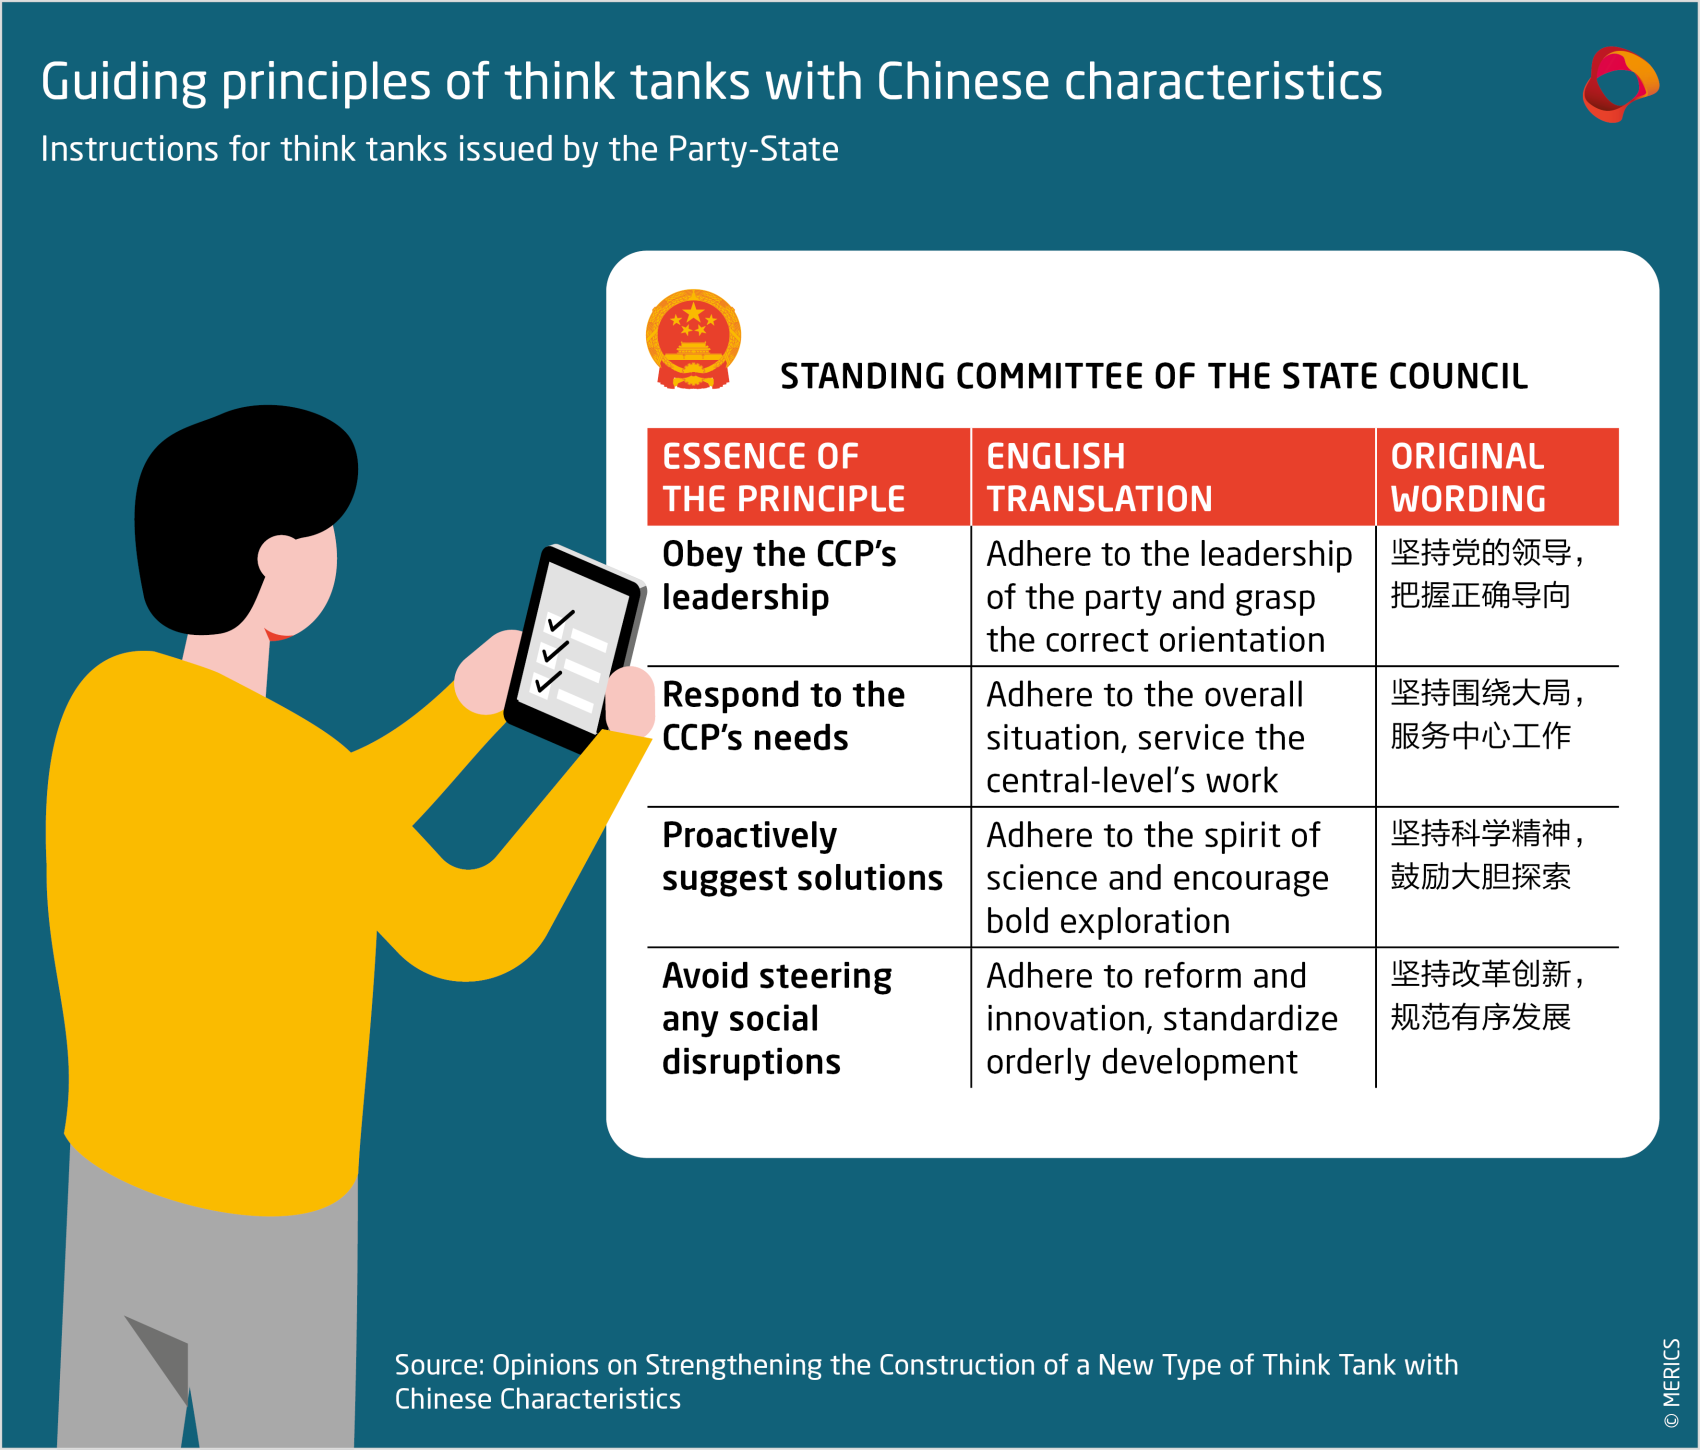 merics-instructions-for-chinese-think-tanks-issued-by-the-party-state.png